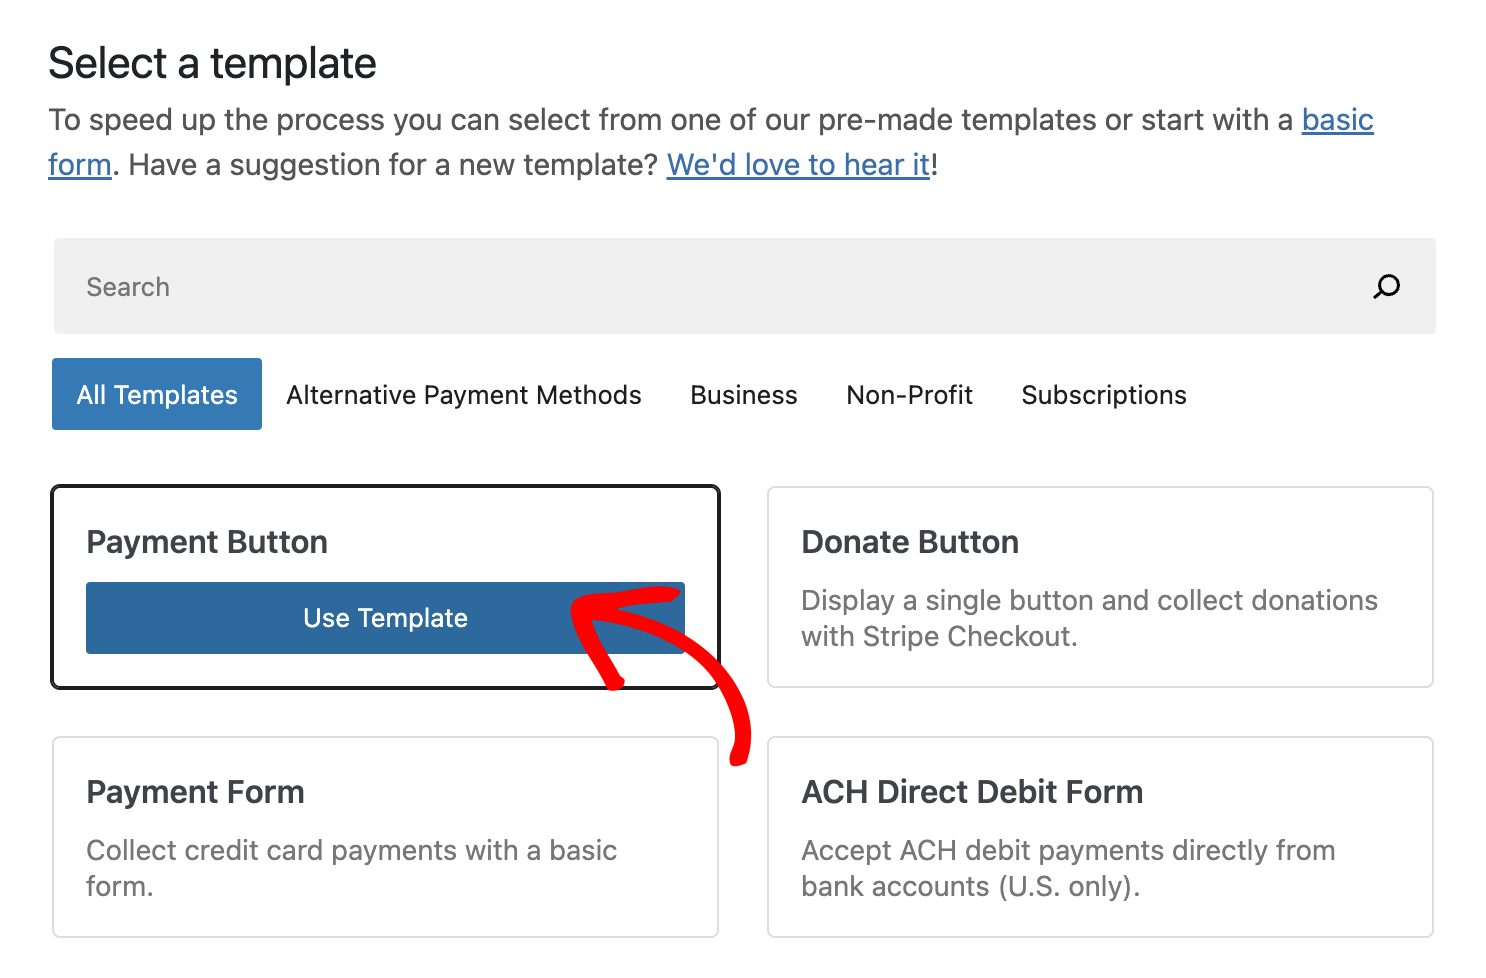 Select the payment button template